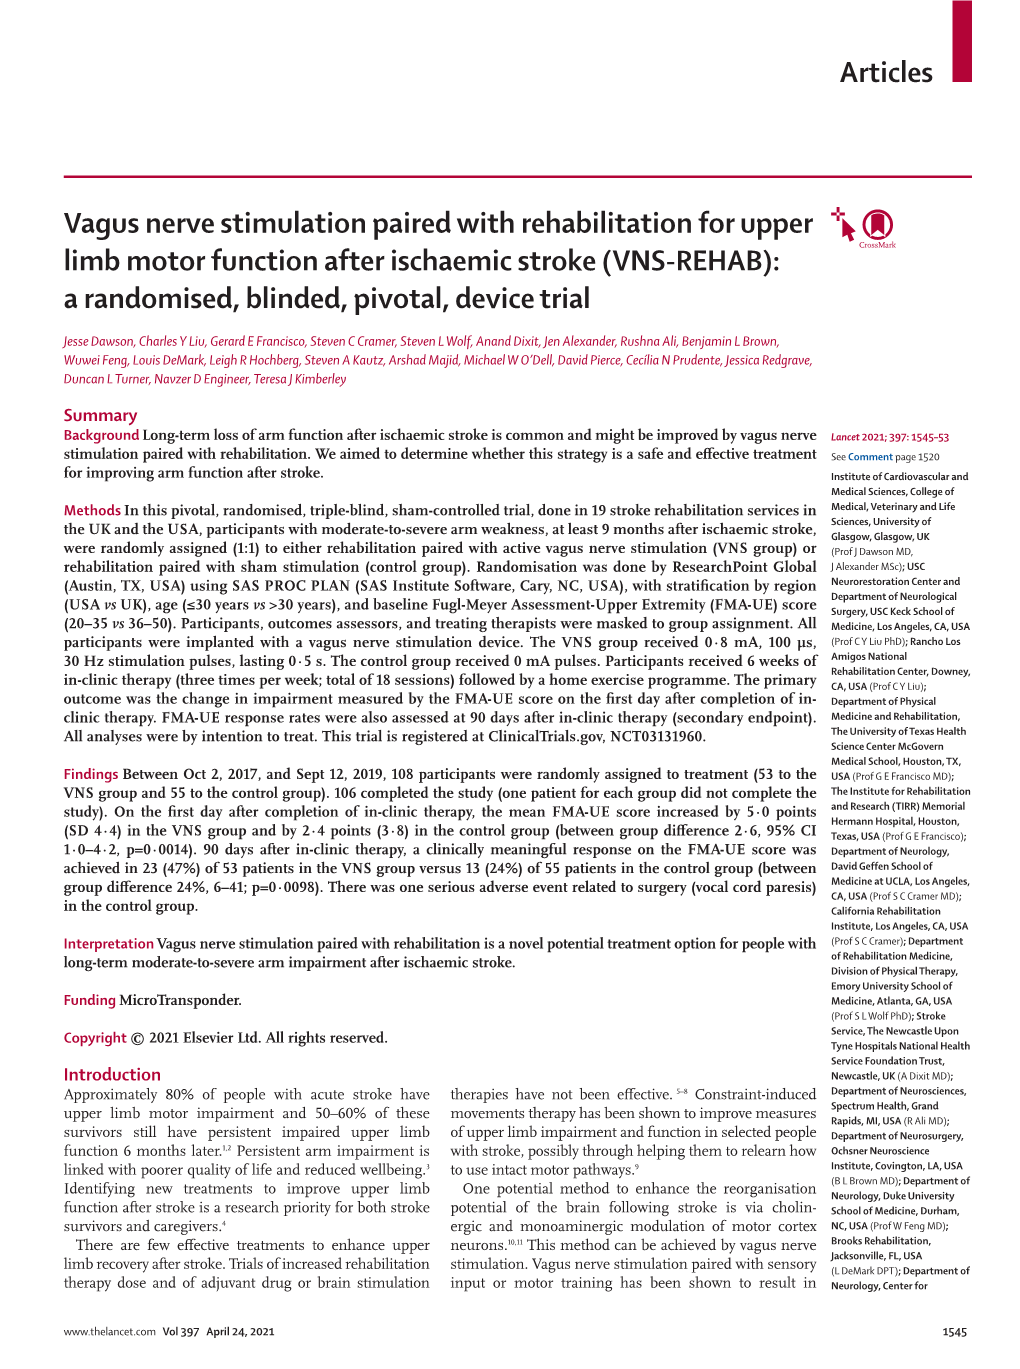 Vagus Nerve Stimulation Paired with Rehabilitation for Upper Limb Motor Function After Ischaemic Stroke (VNS-REHAB): a Randomised, Blinded, Pivotal, Device Trial